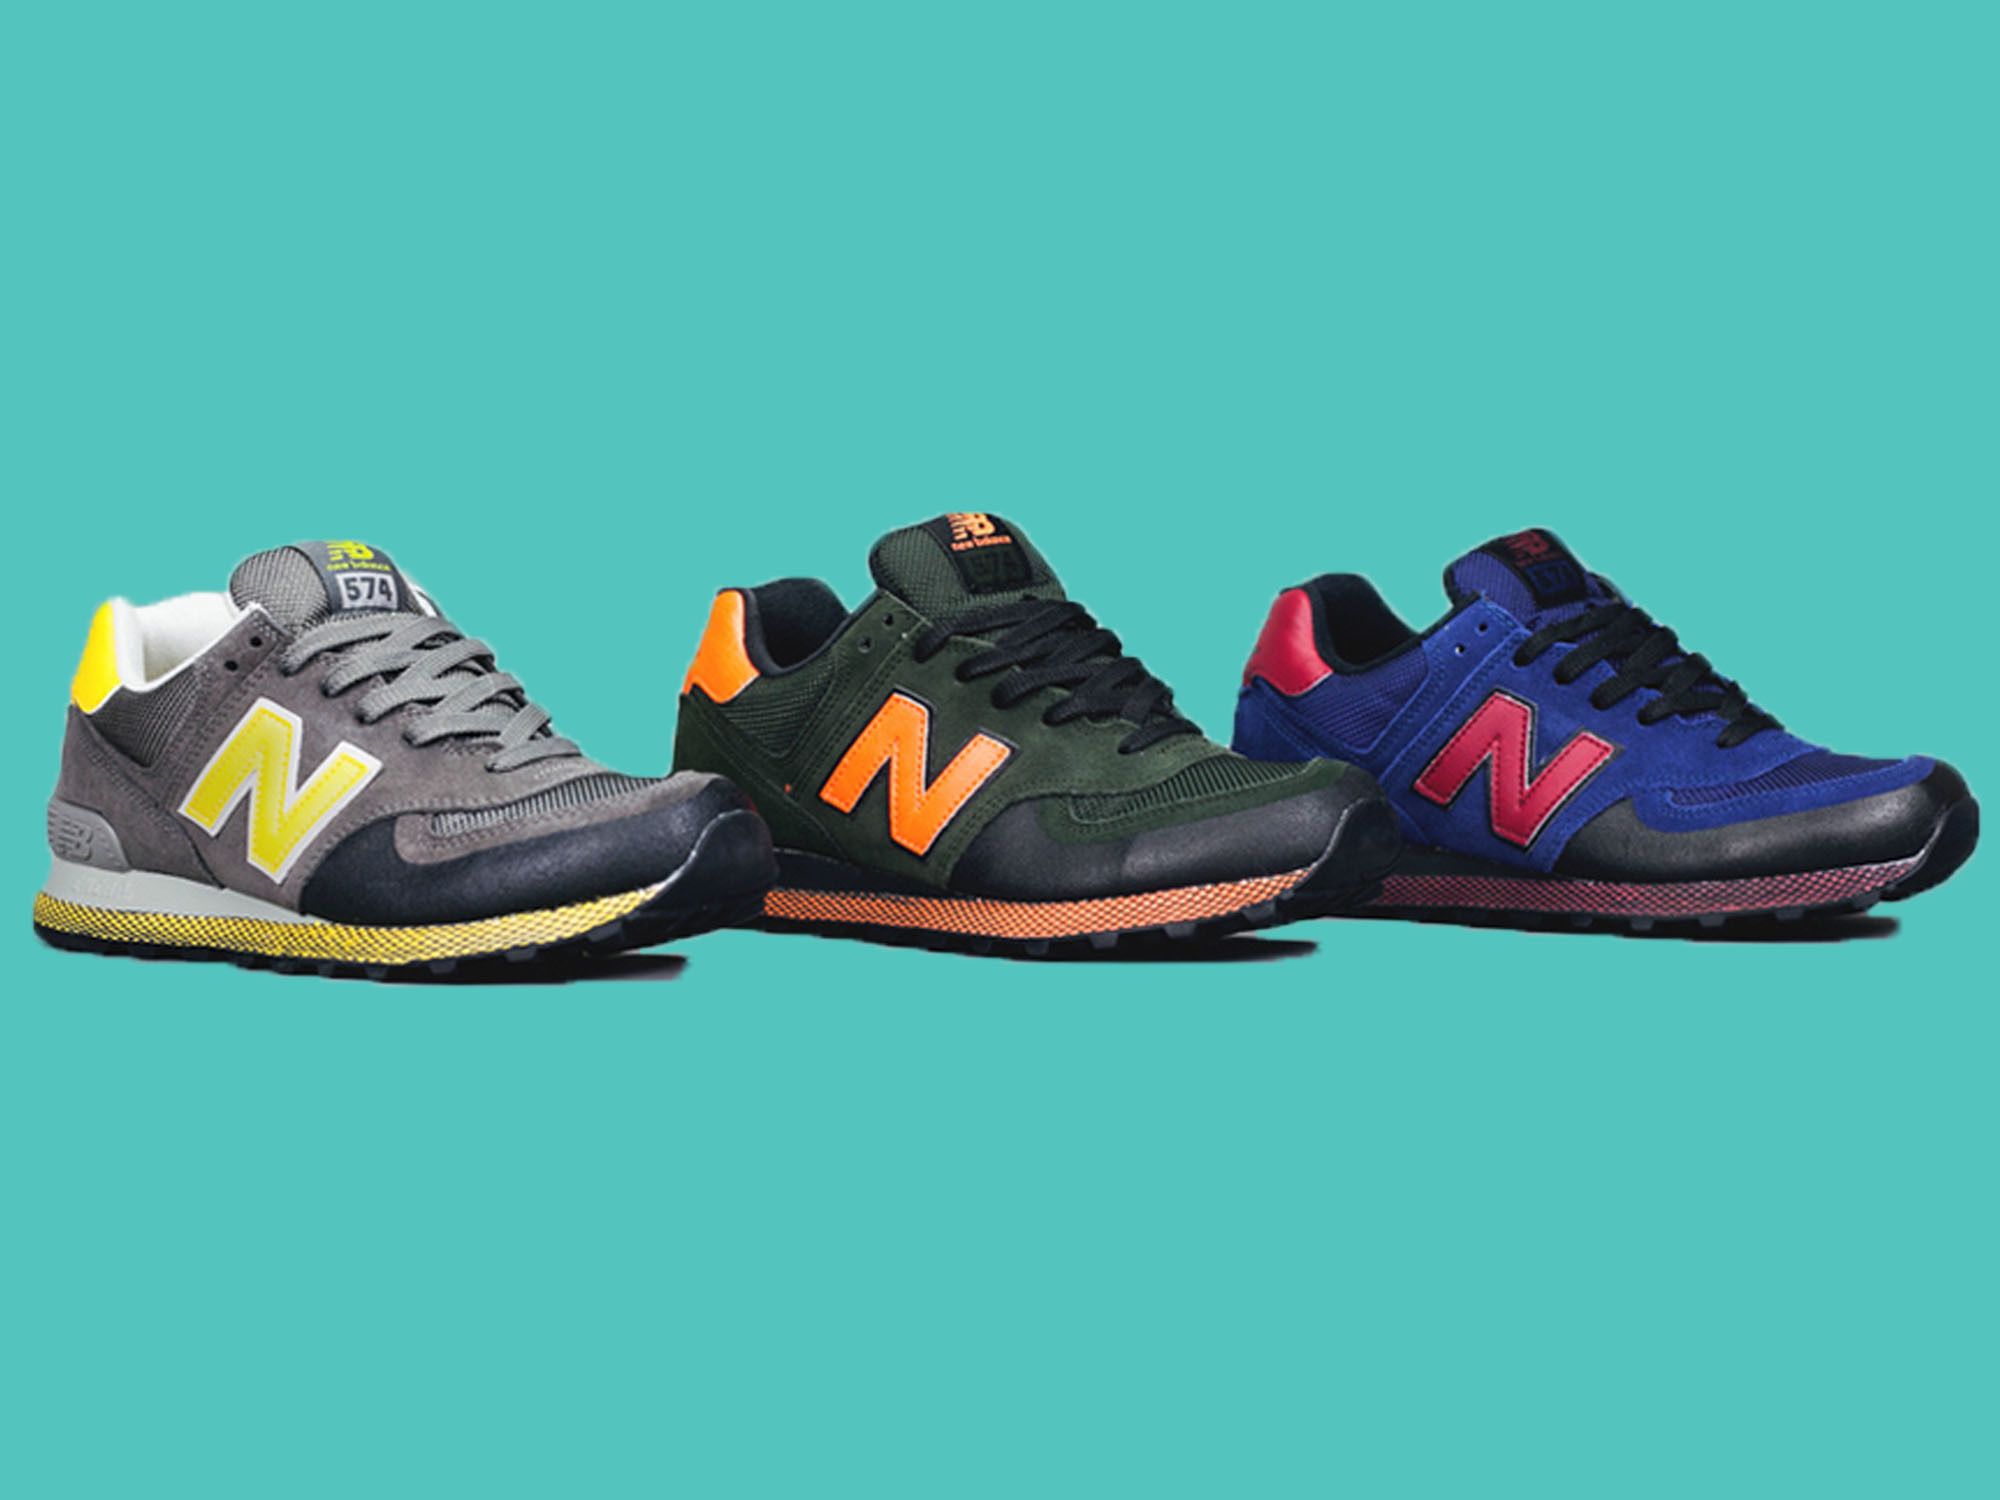 New Balance 574: Trainers Built For Winter